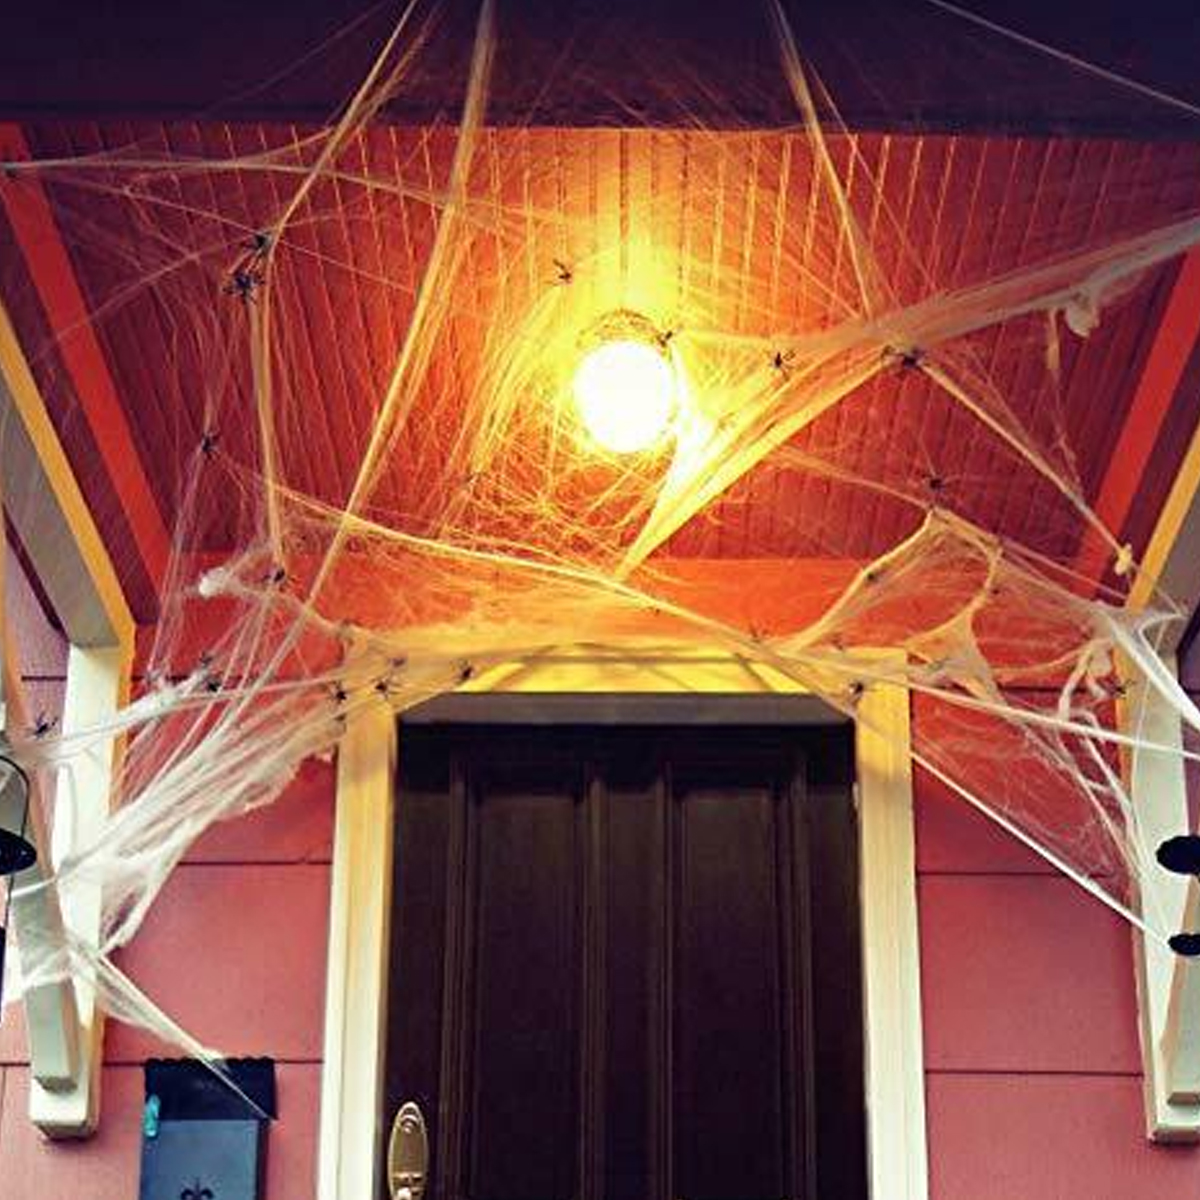 250g-Spider-Web-With-48Pcs-Small-Spiders-Halloween-Outdoor-Party-Decorations-Props-Supplies-1730880-6